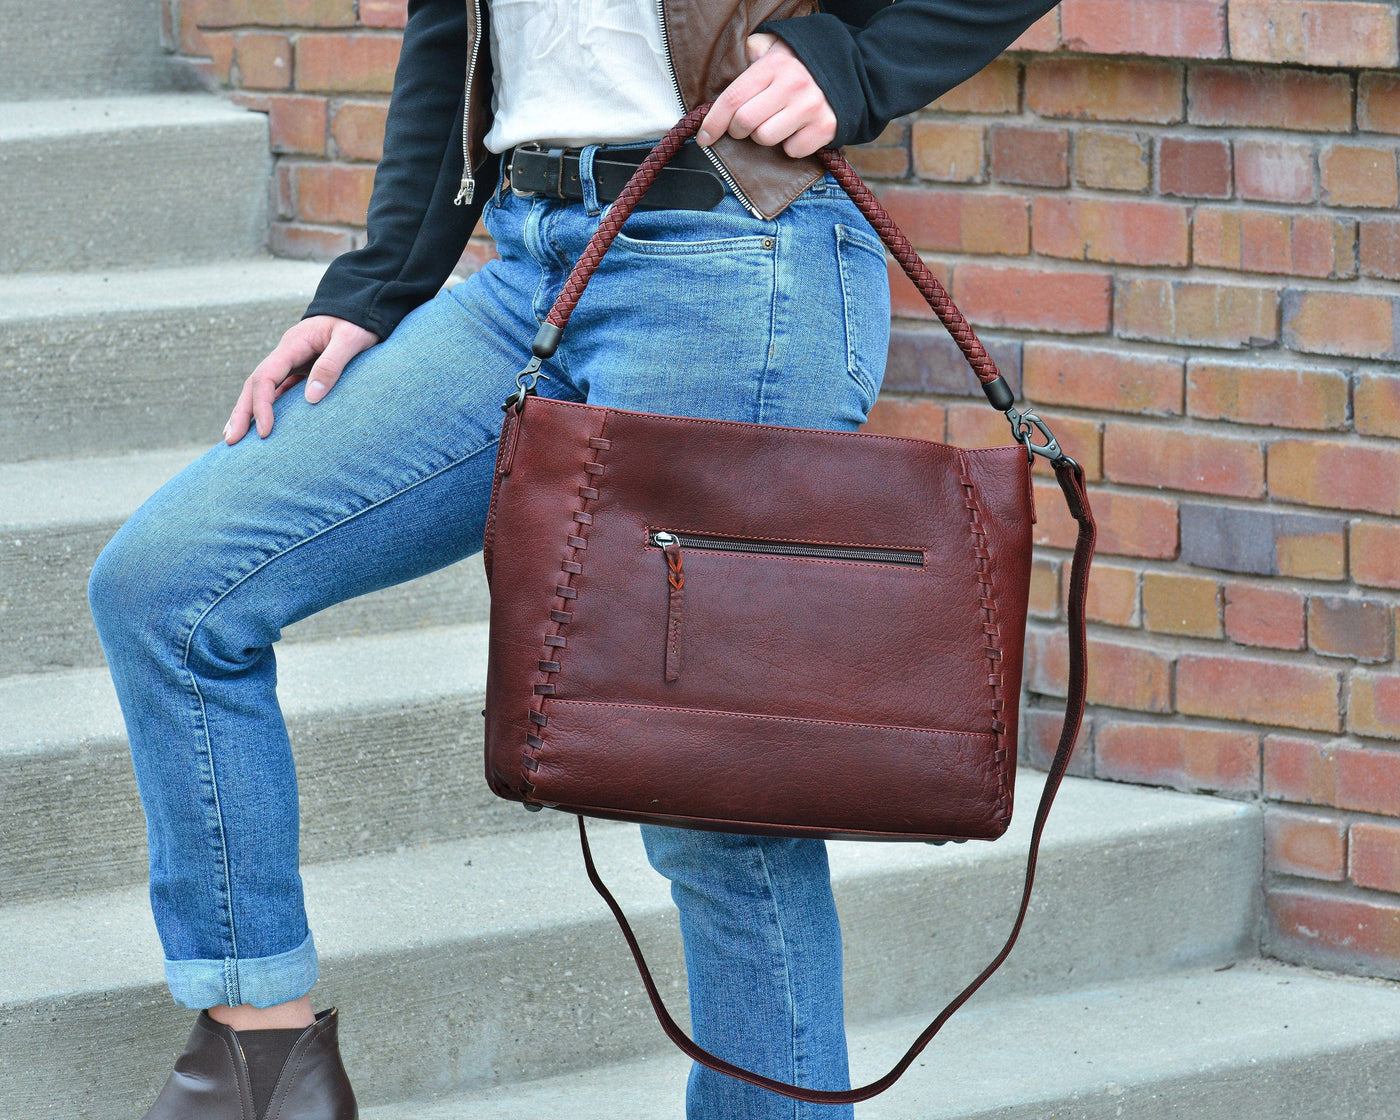 Leather concealed carry crossbody purse. Beautiful Wine color